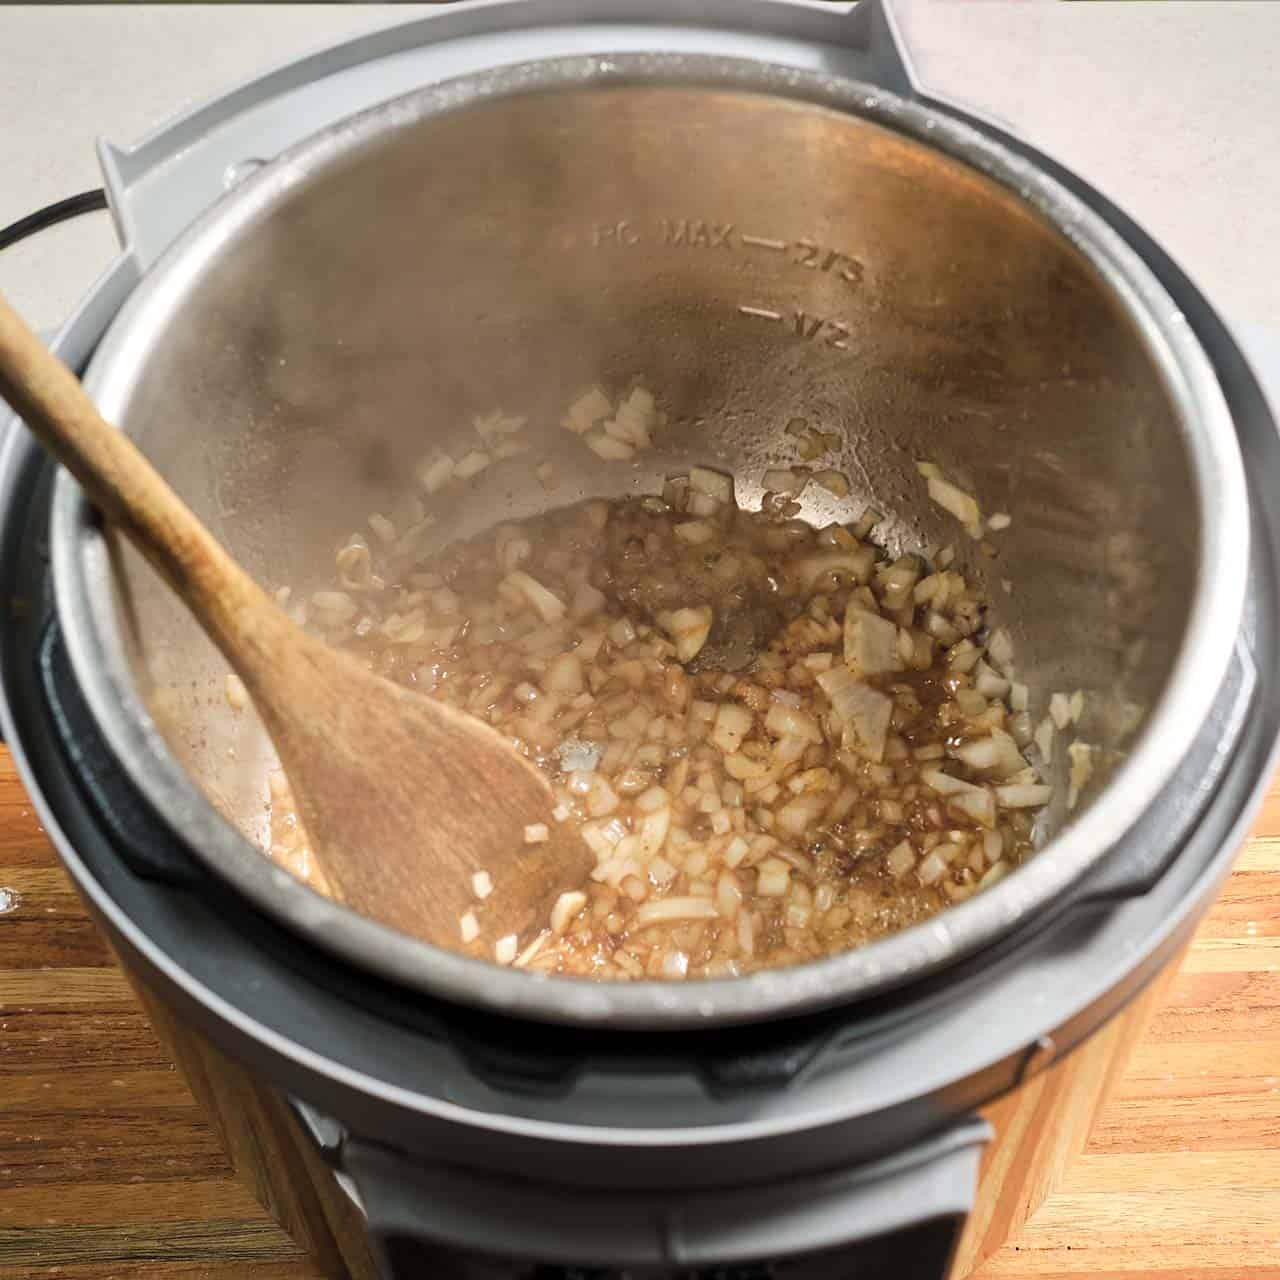 Sauteing the aromatics in an Instant Pot